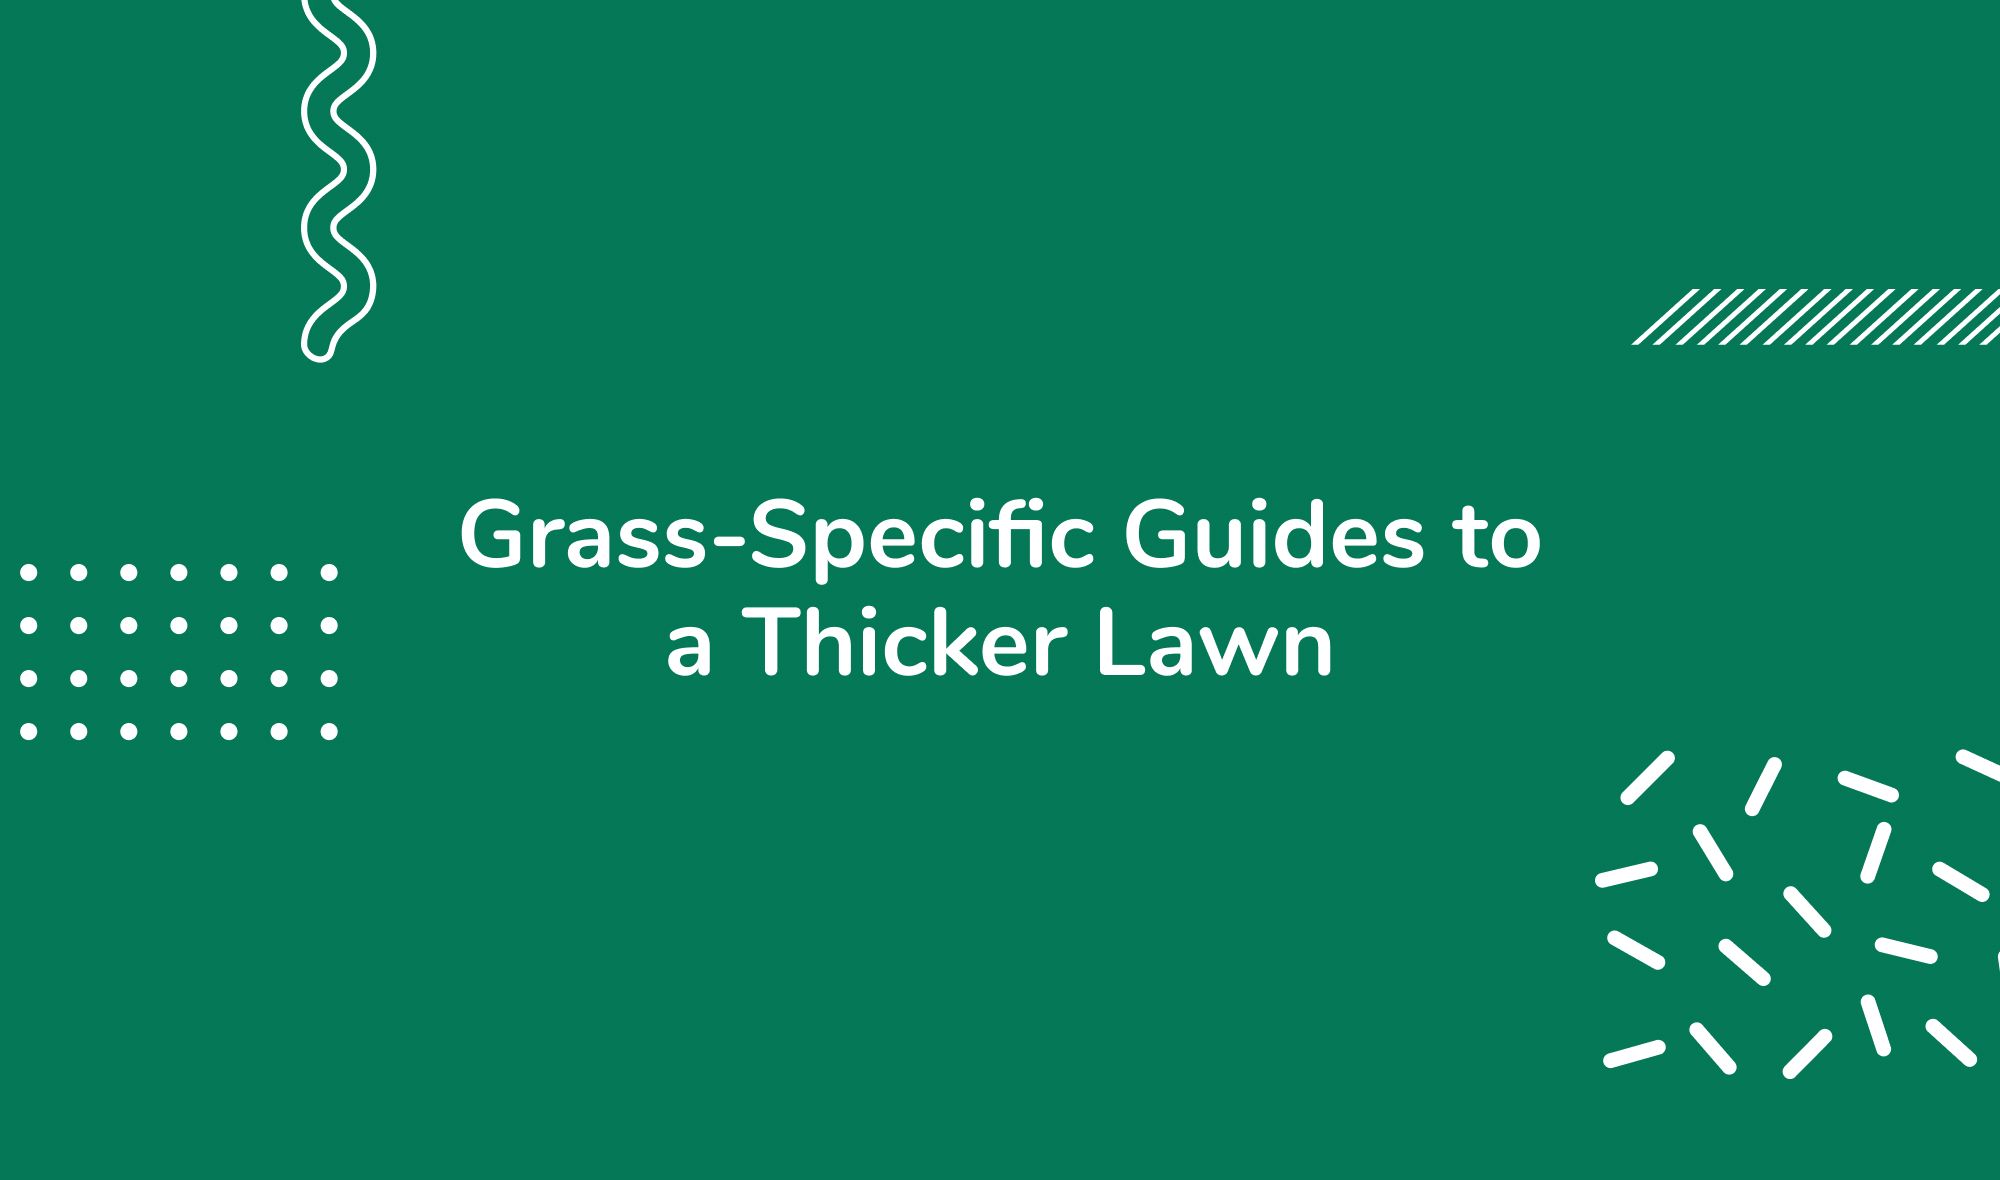 Grass-Specific Guides to a Thicker Lawn